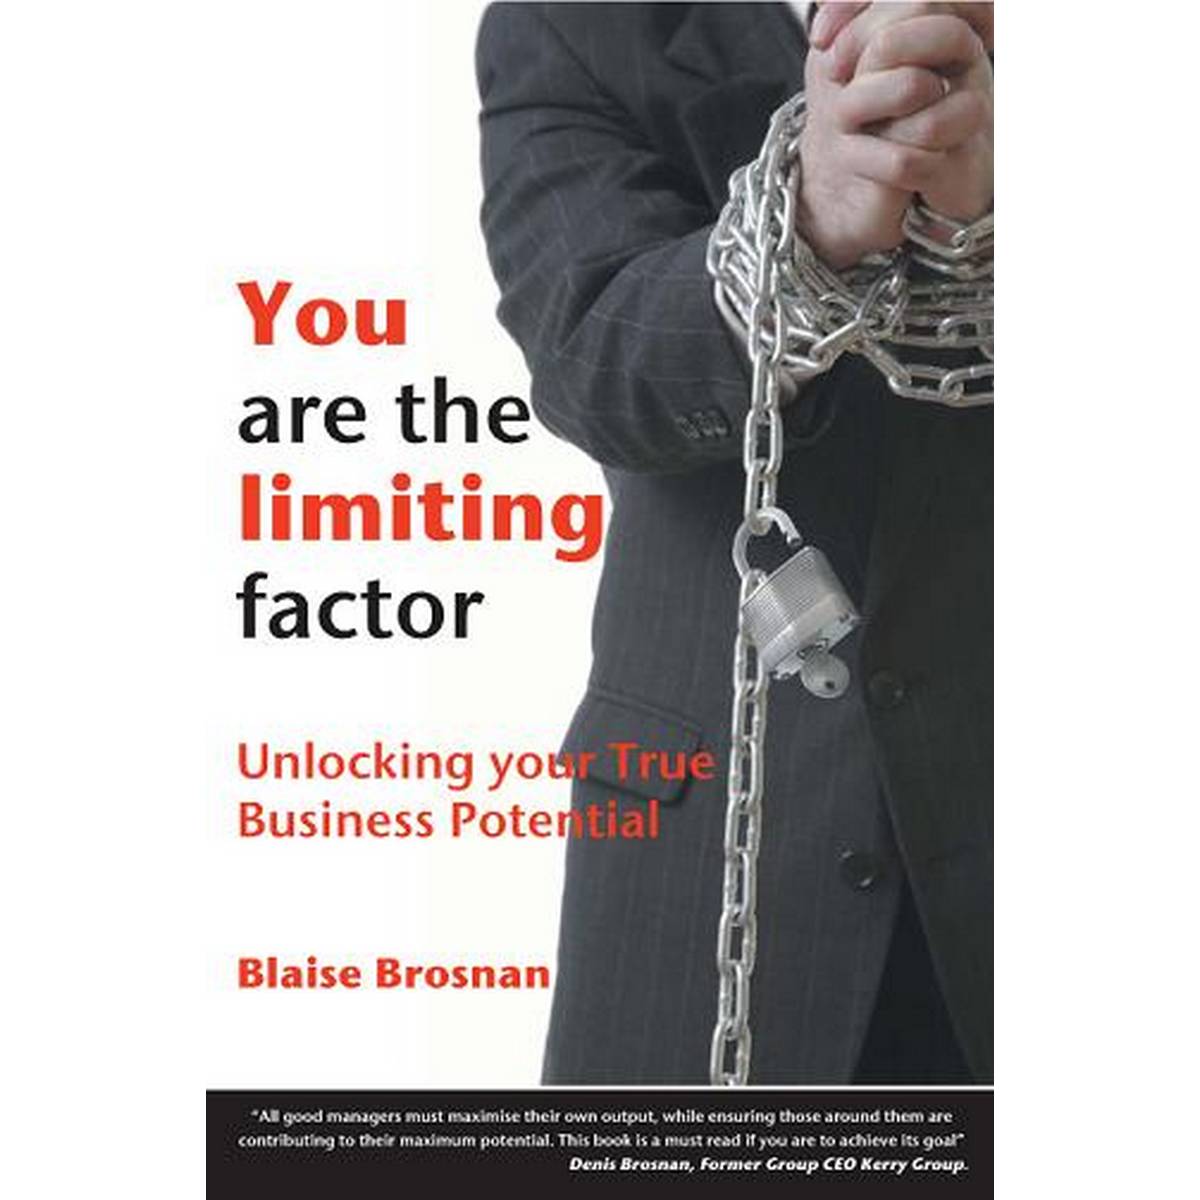 You are the Limiting Factor: Unlocking your True Business Potential by Blaise Brosnan